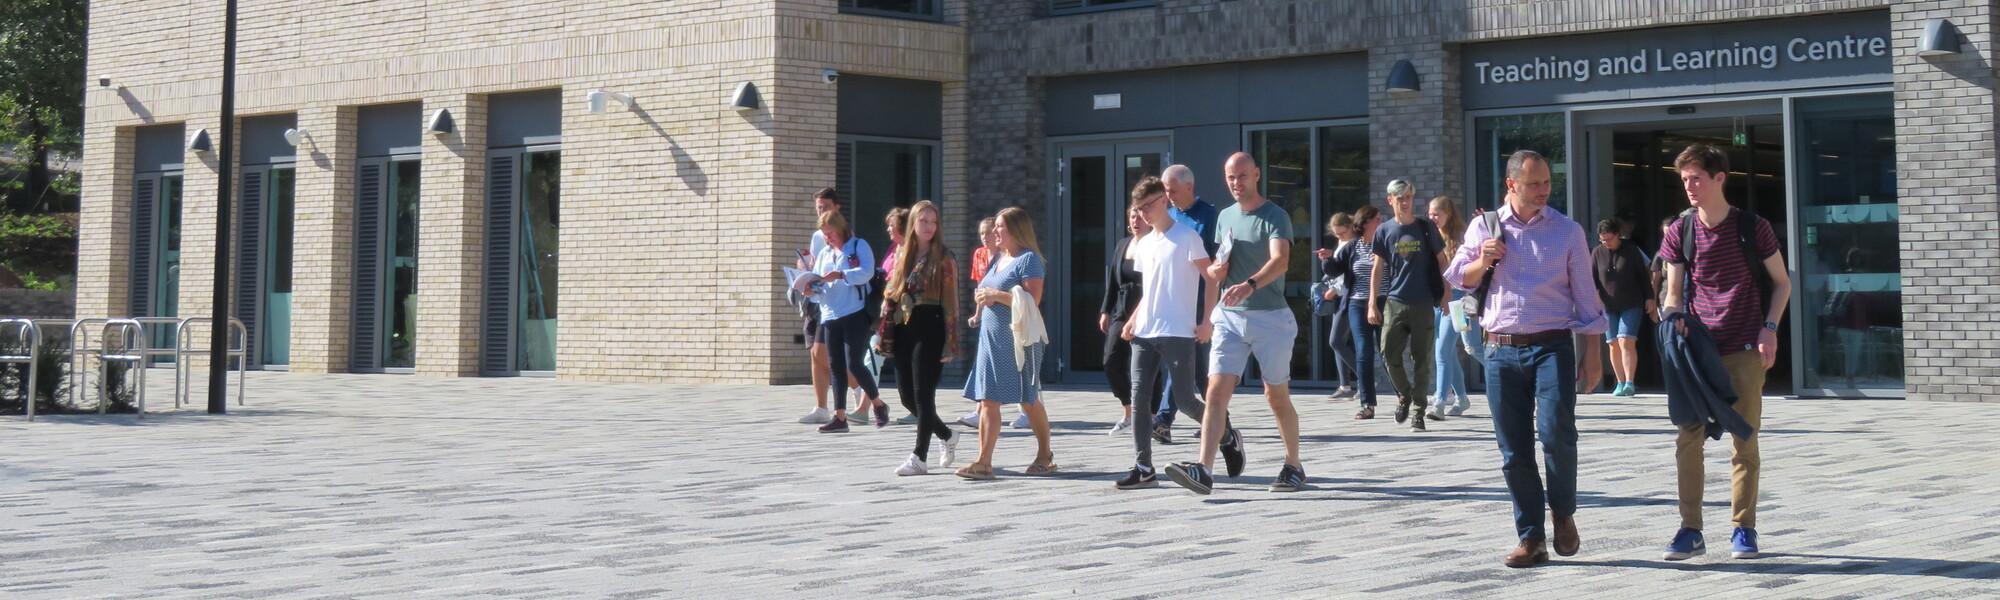 People exiting the teaching and learning centre